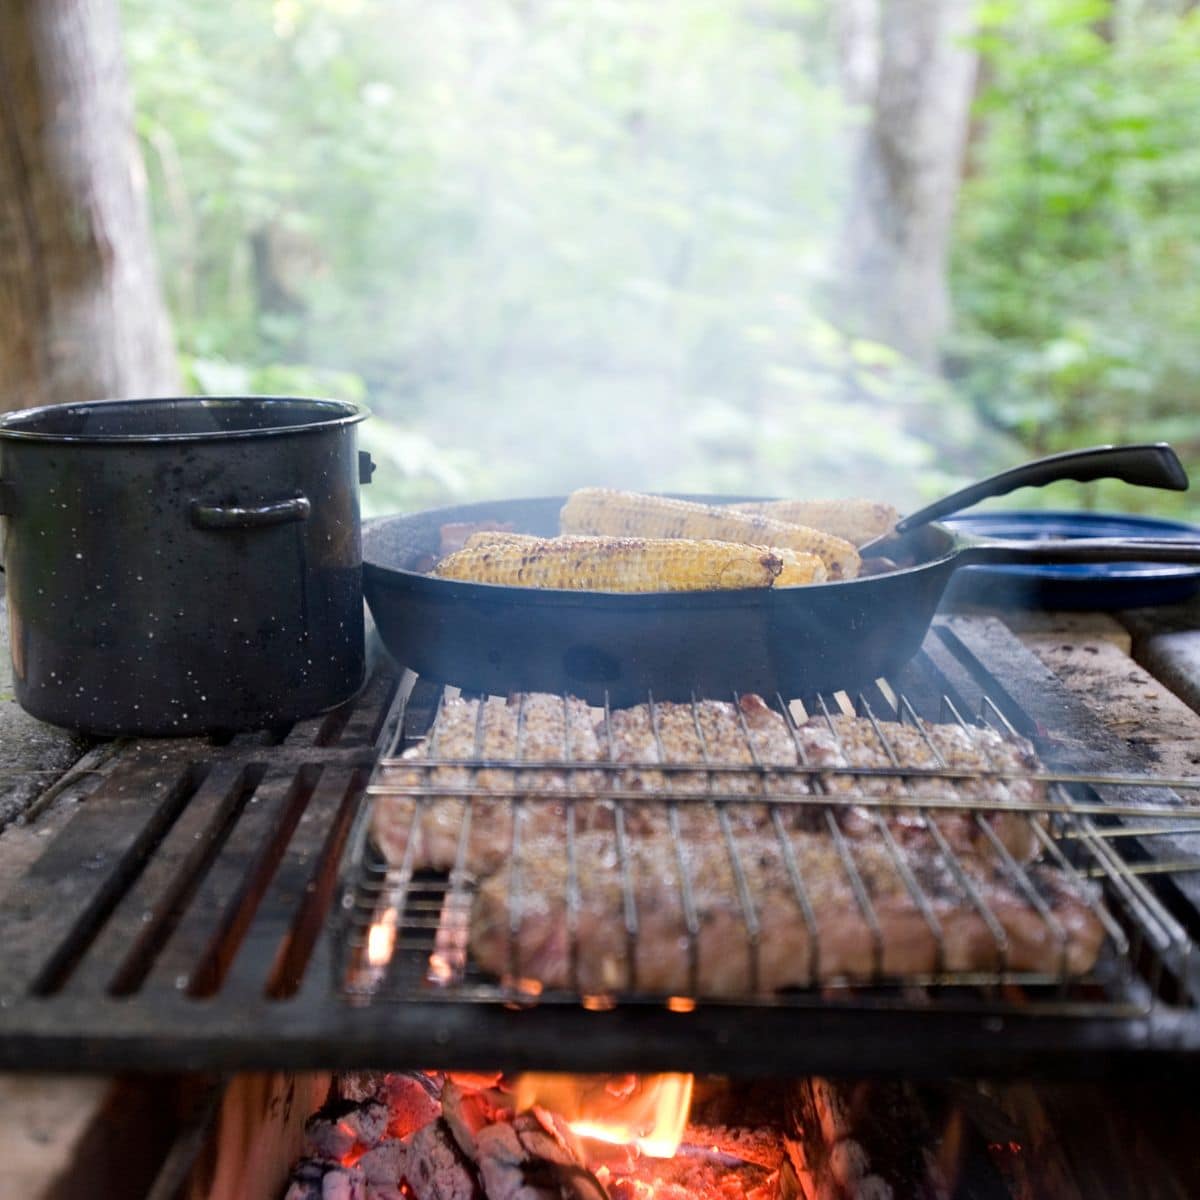 Foods cooking on a campfire grill.